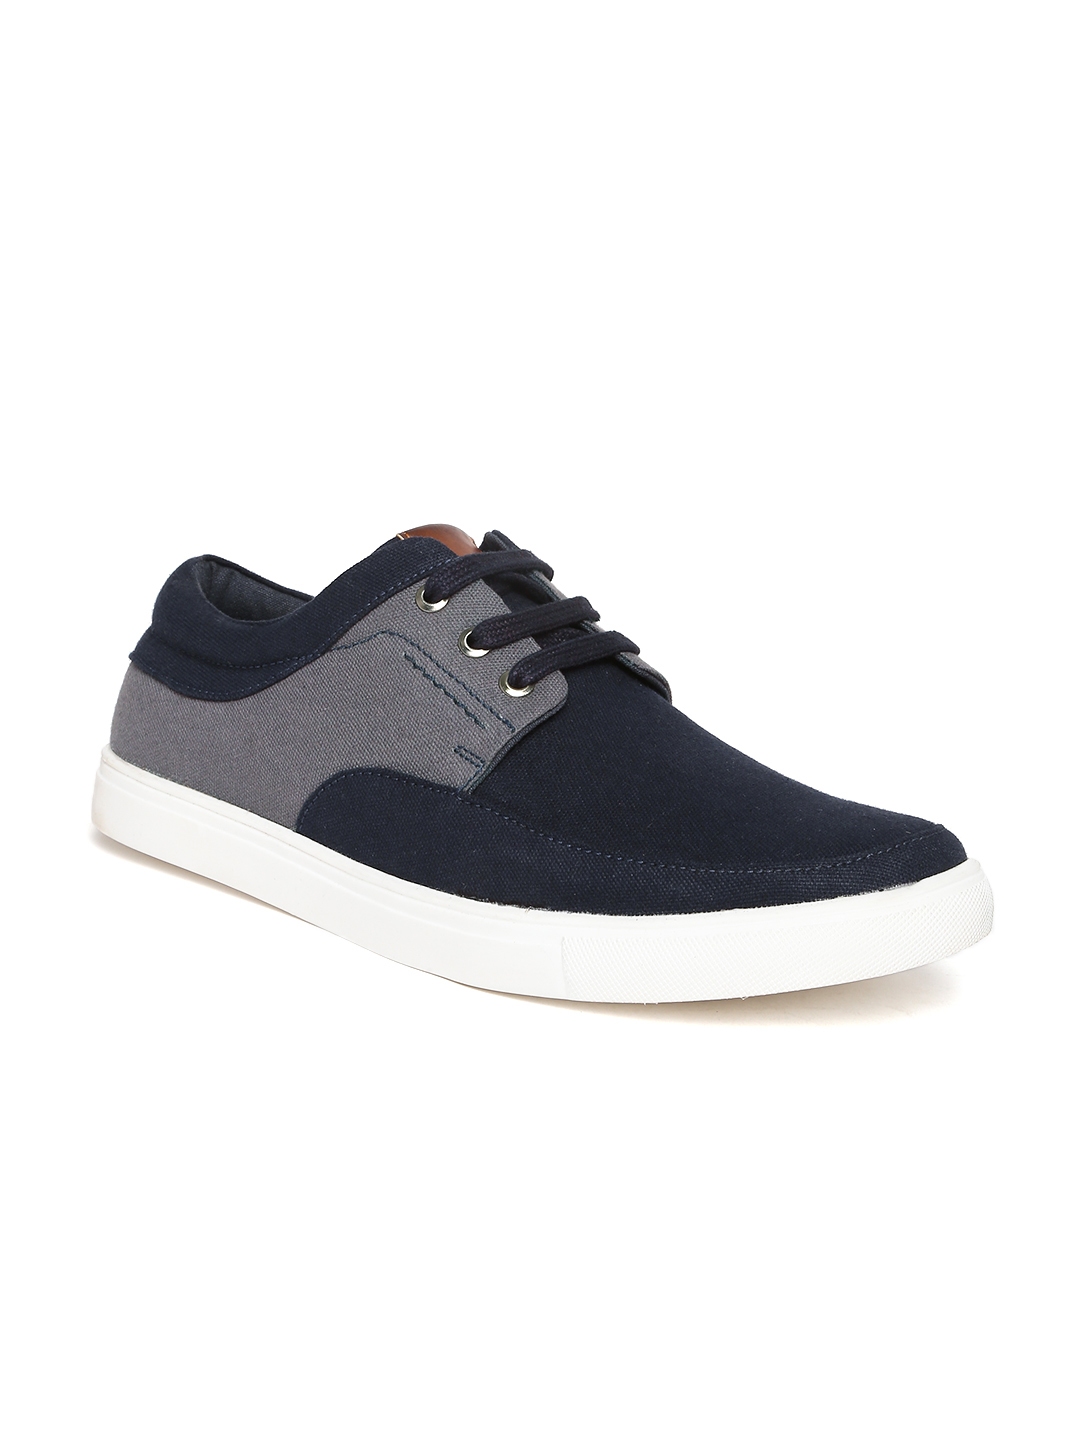 Buy Roadster Men Navy & Grey Canvas Shoes - Casual Shoes for Men ...